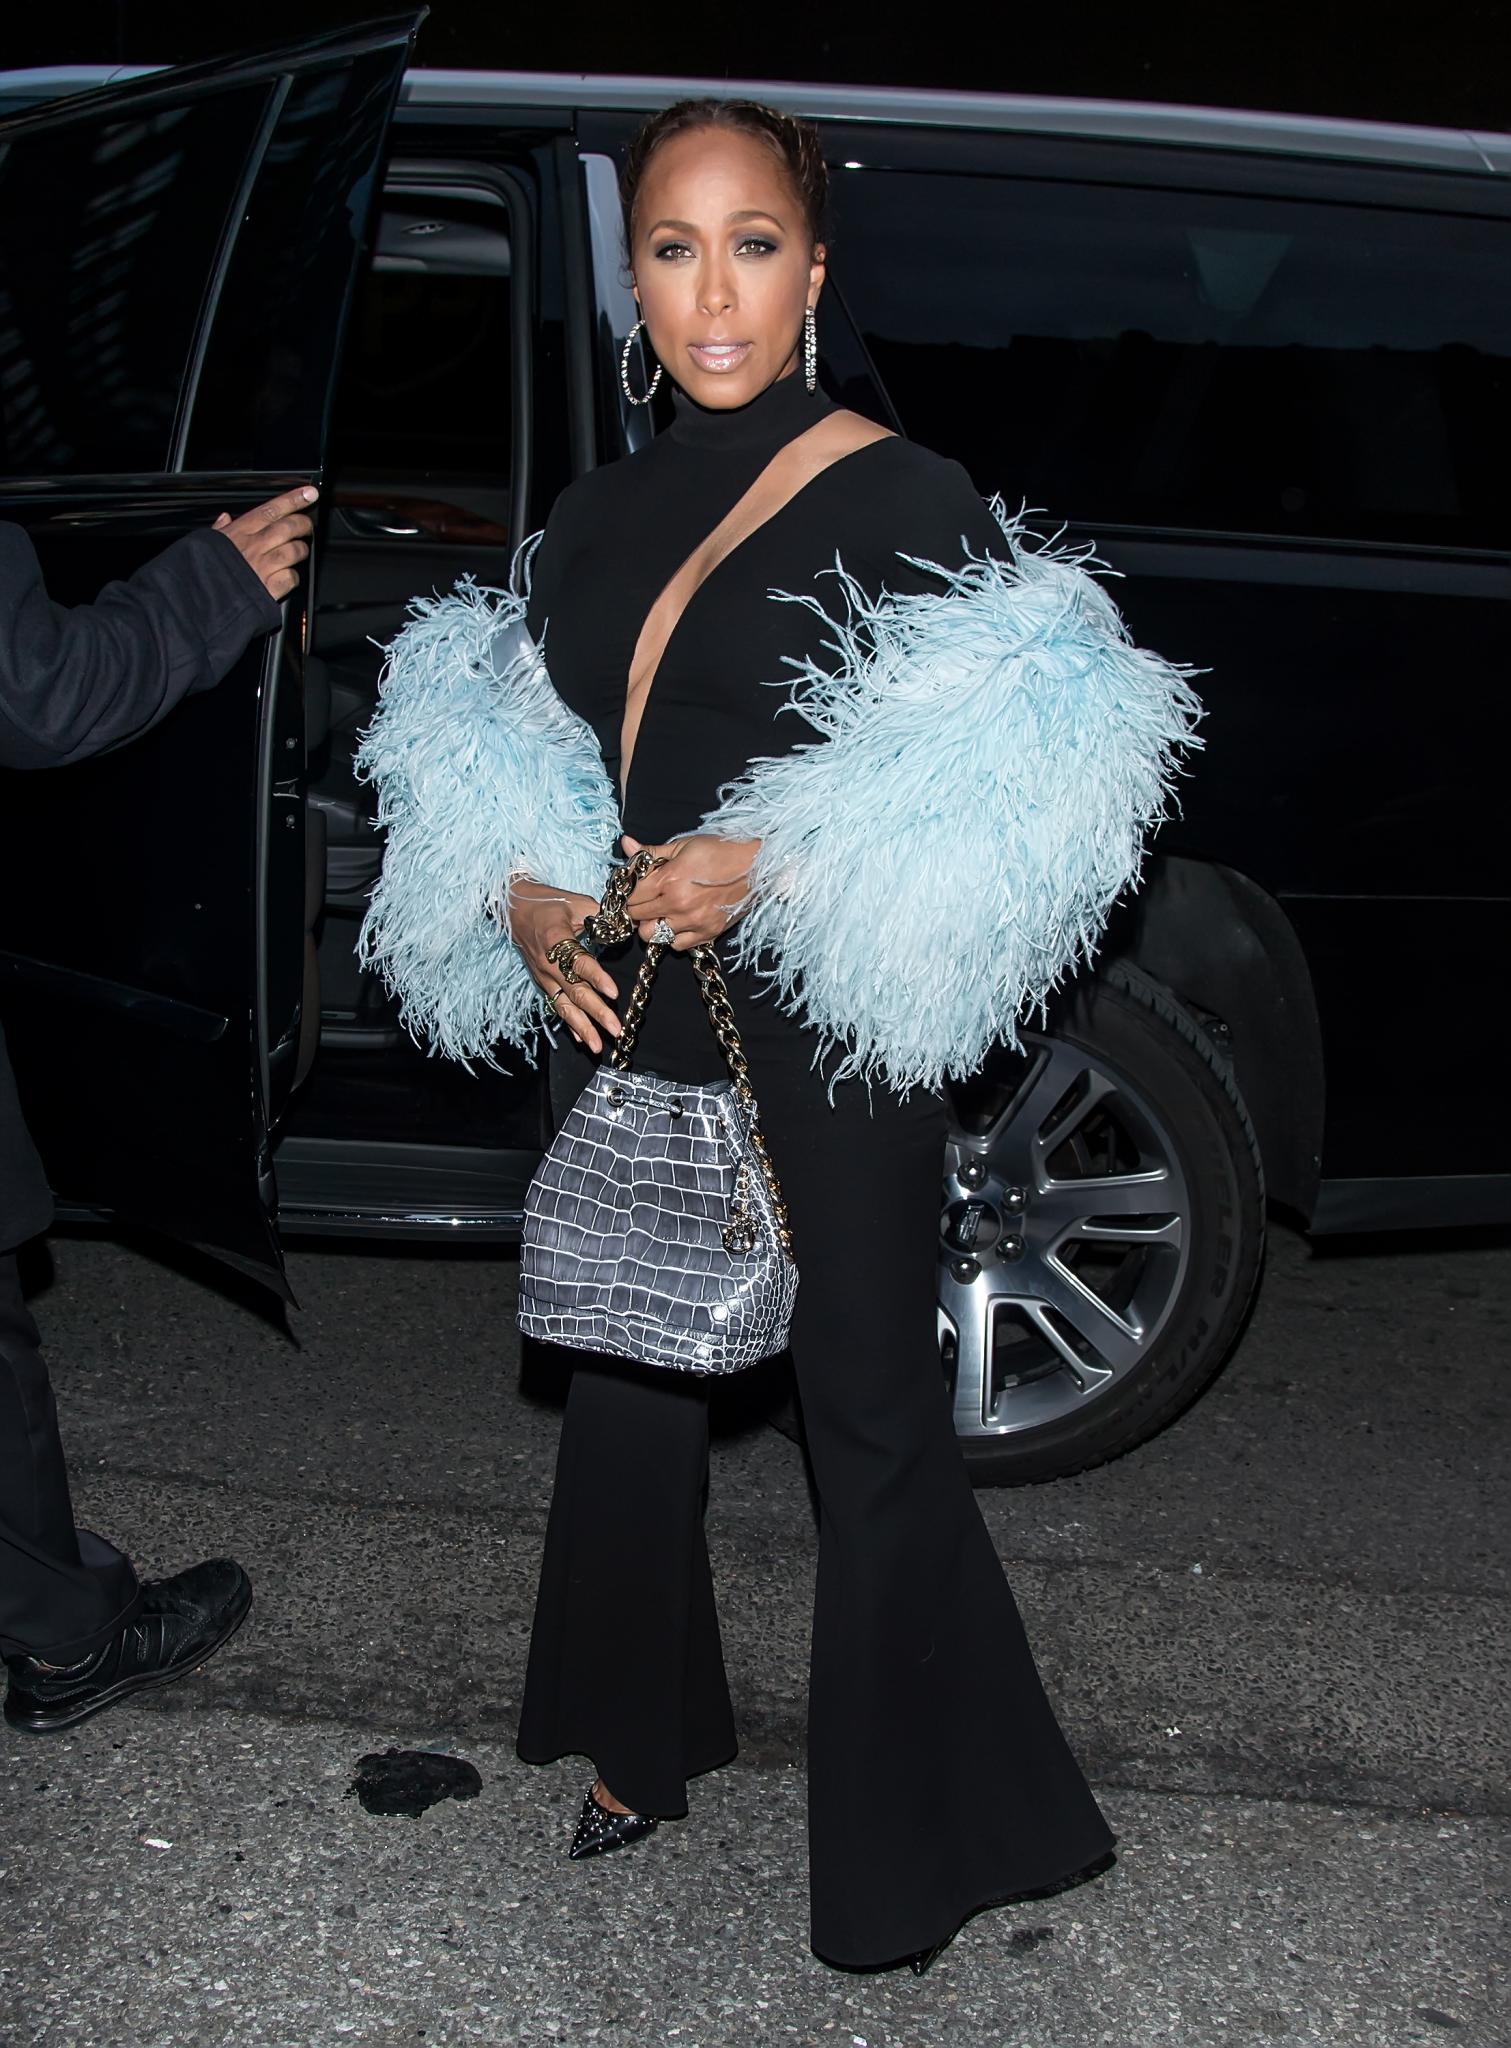 Ciara, Kelly Rowland and Tracee Ellis Ross Made Major Style Statements This Week
